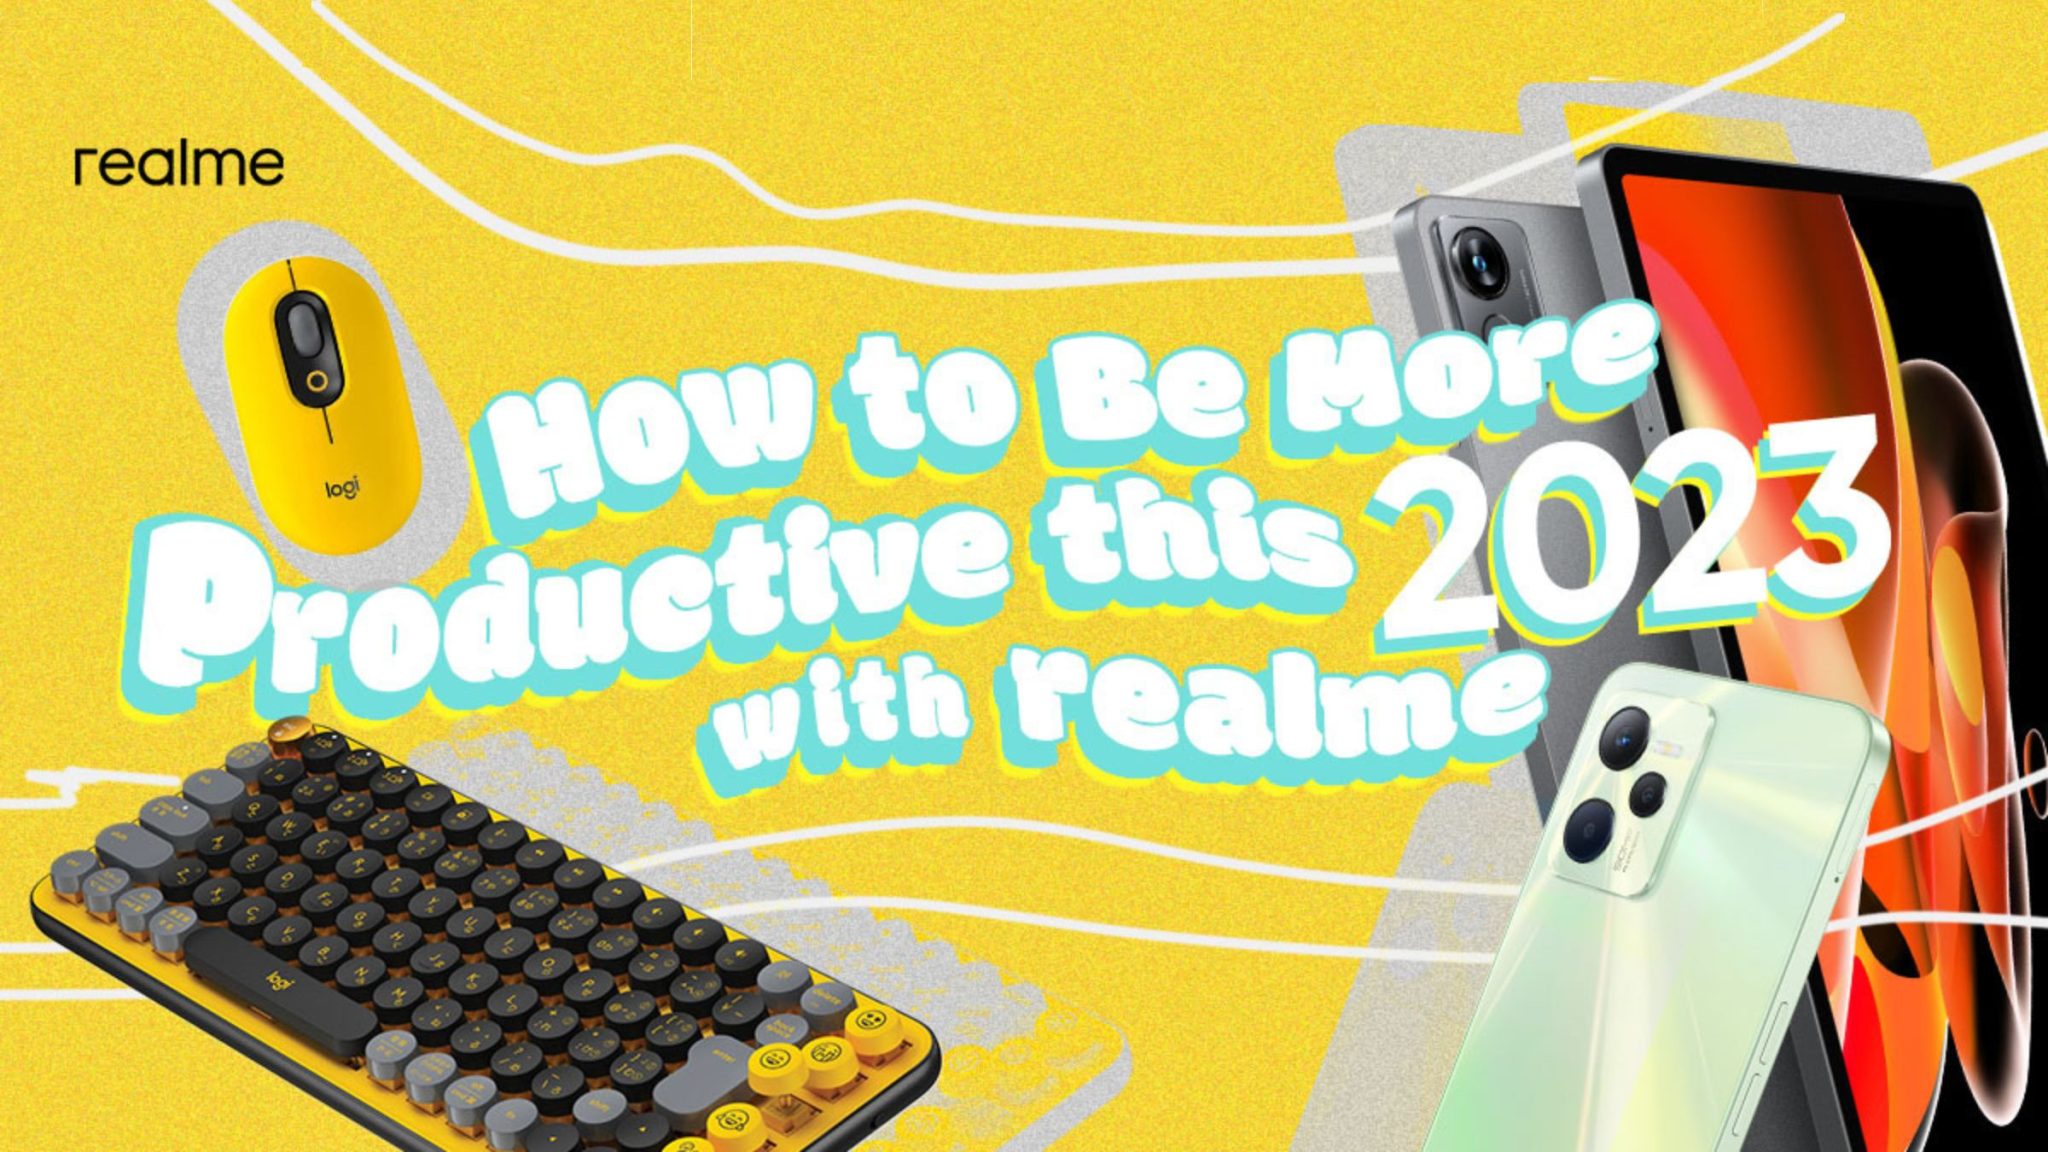 realme and Logitech Productive 2023 Header